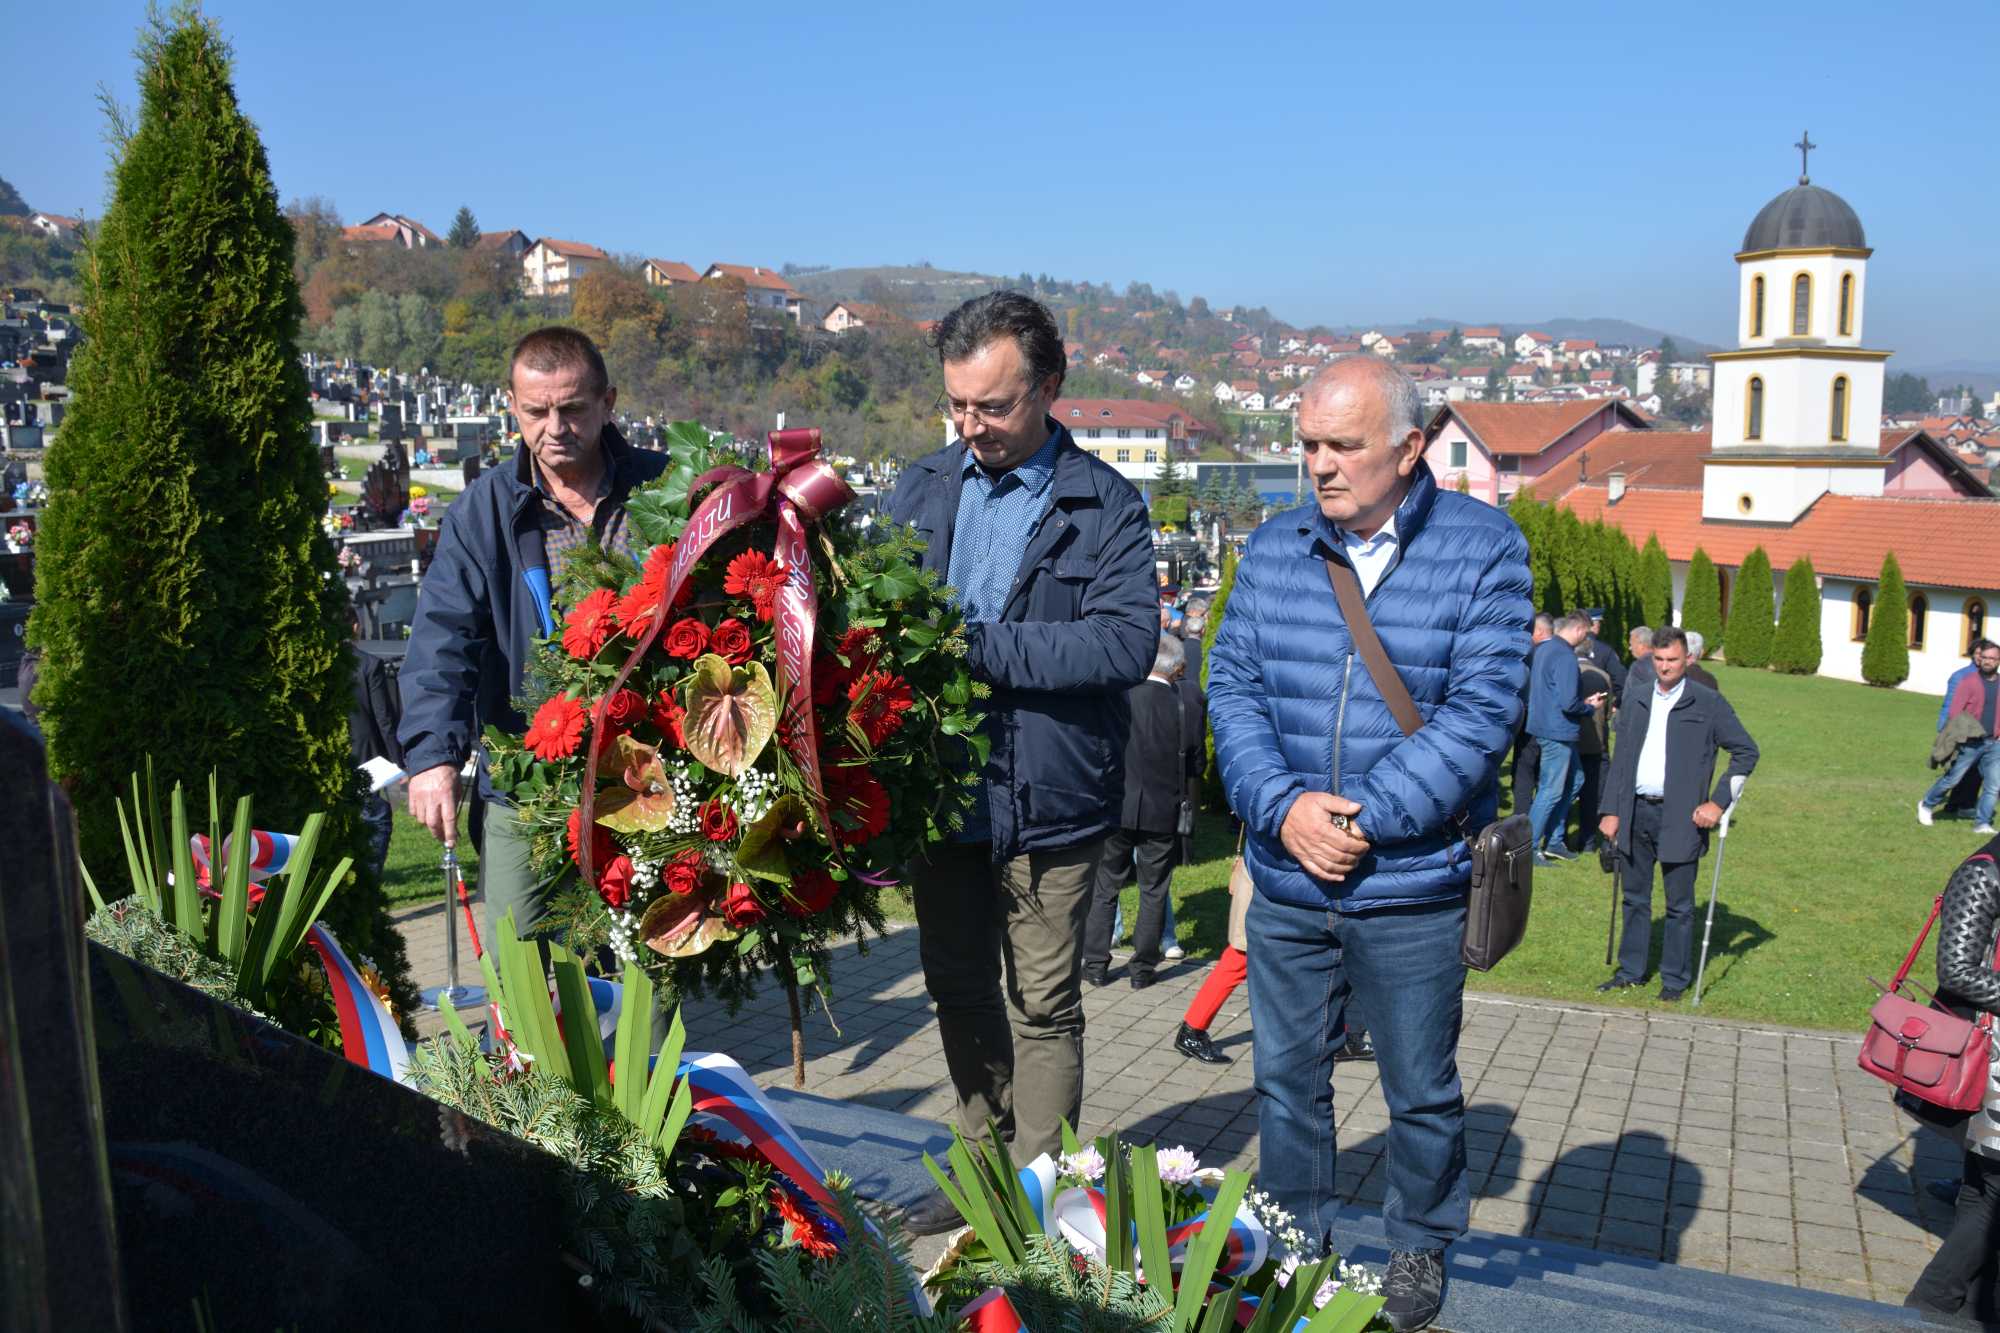 We paid our respects to victims killed in Mrkonjić Grad